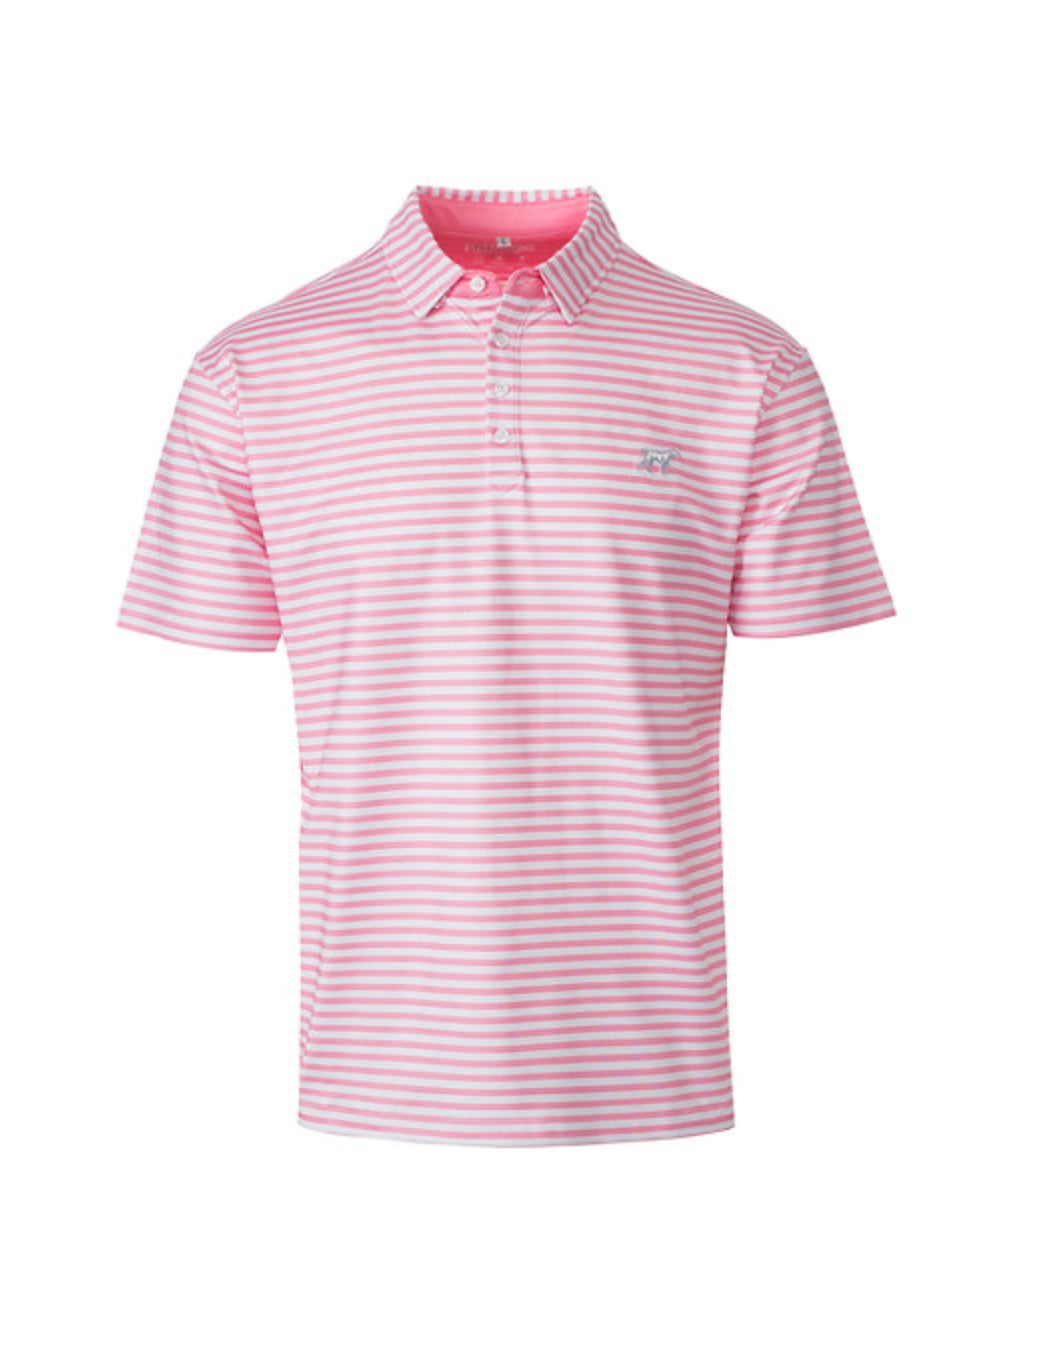 R459Y Youth Carlyle Performance Polo